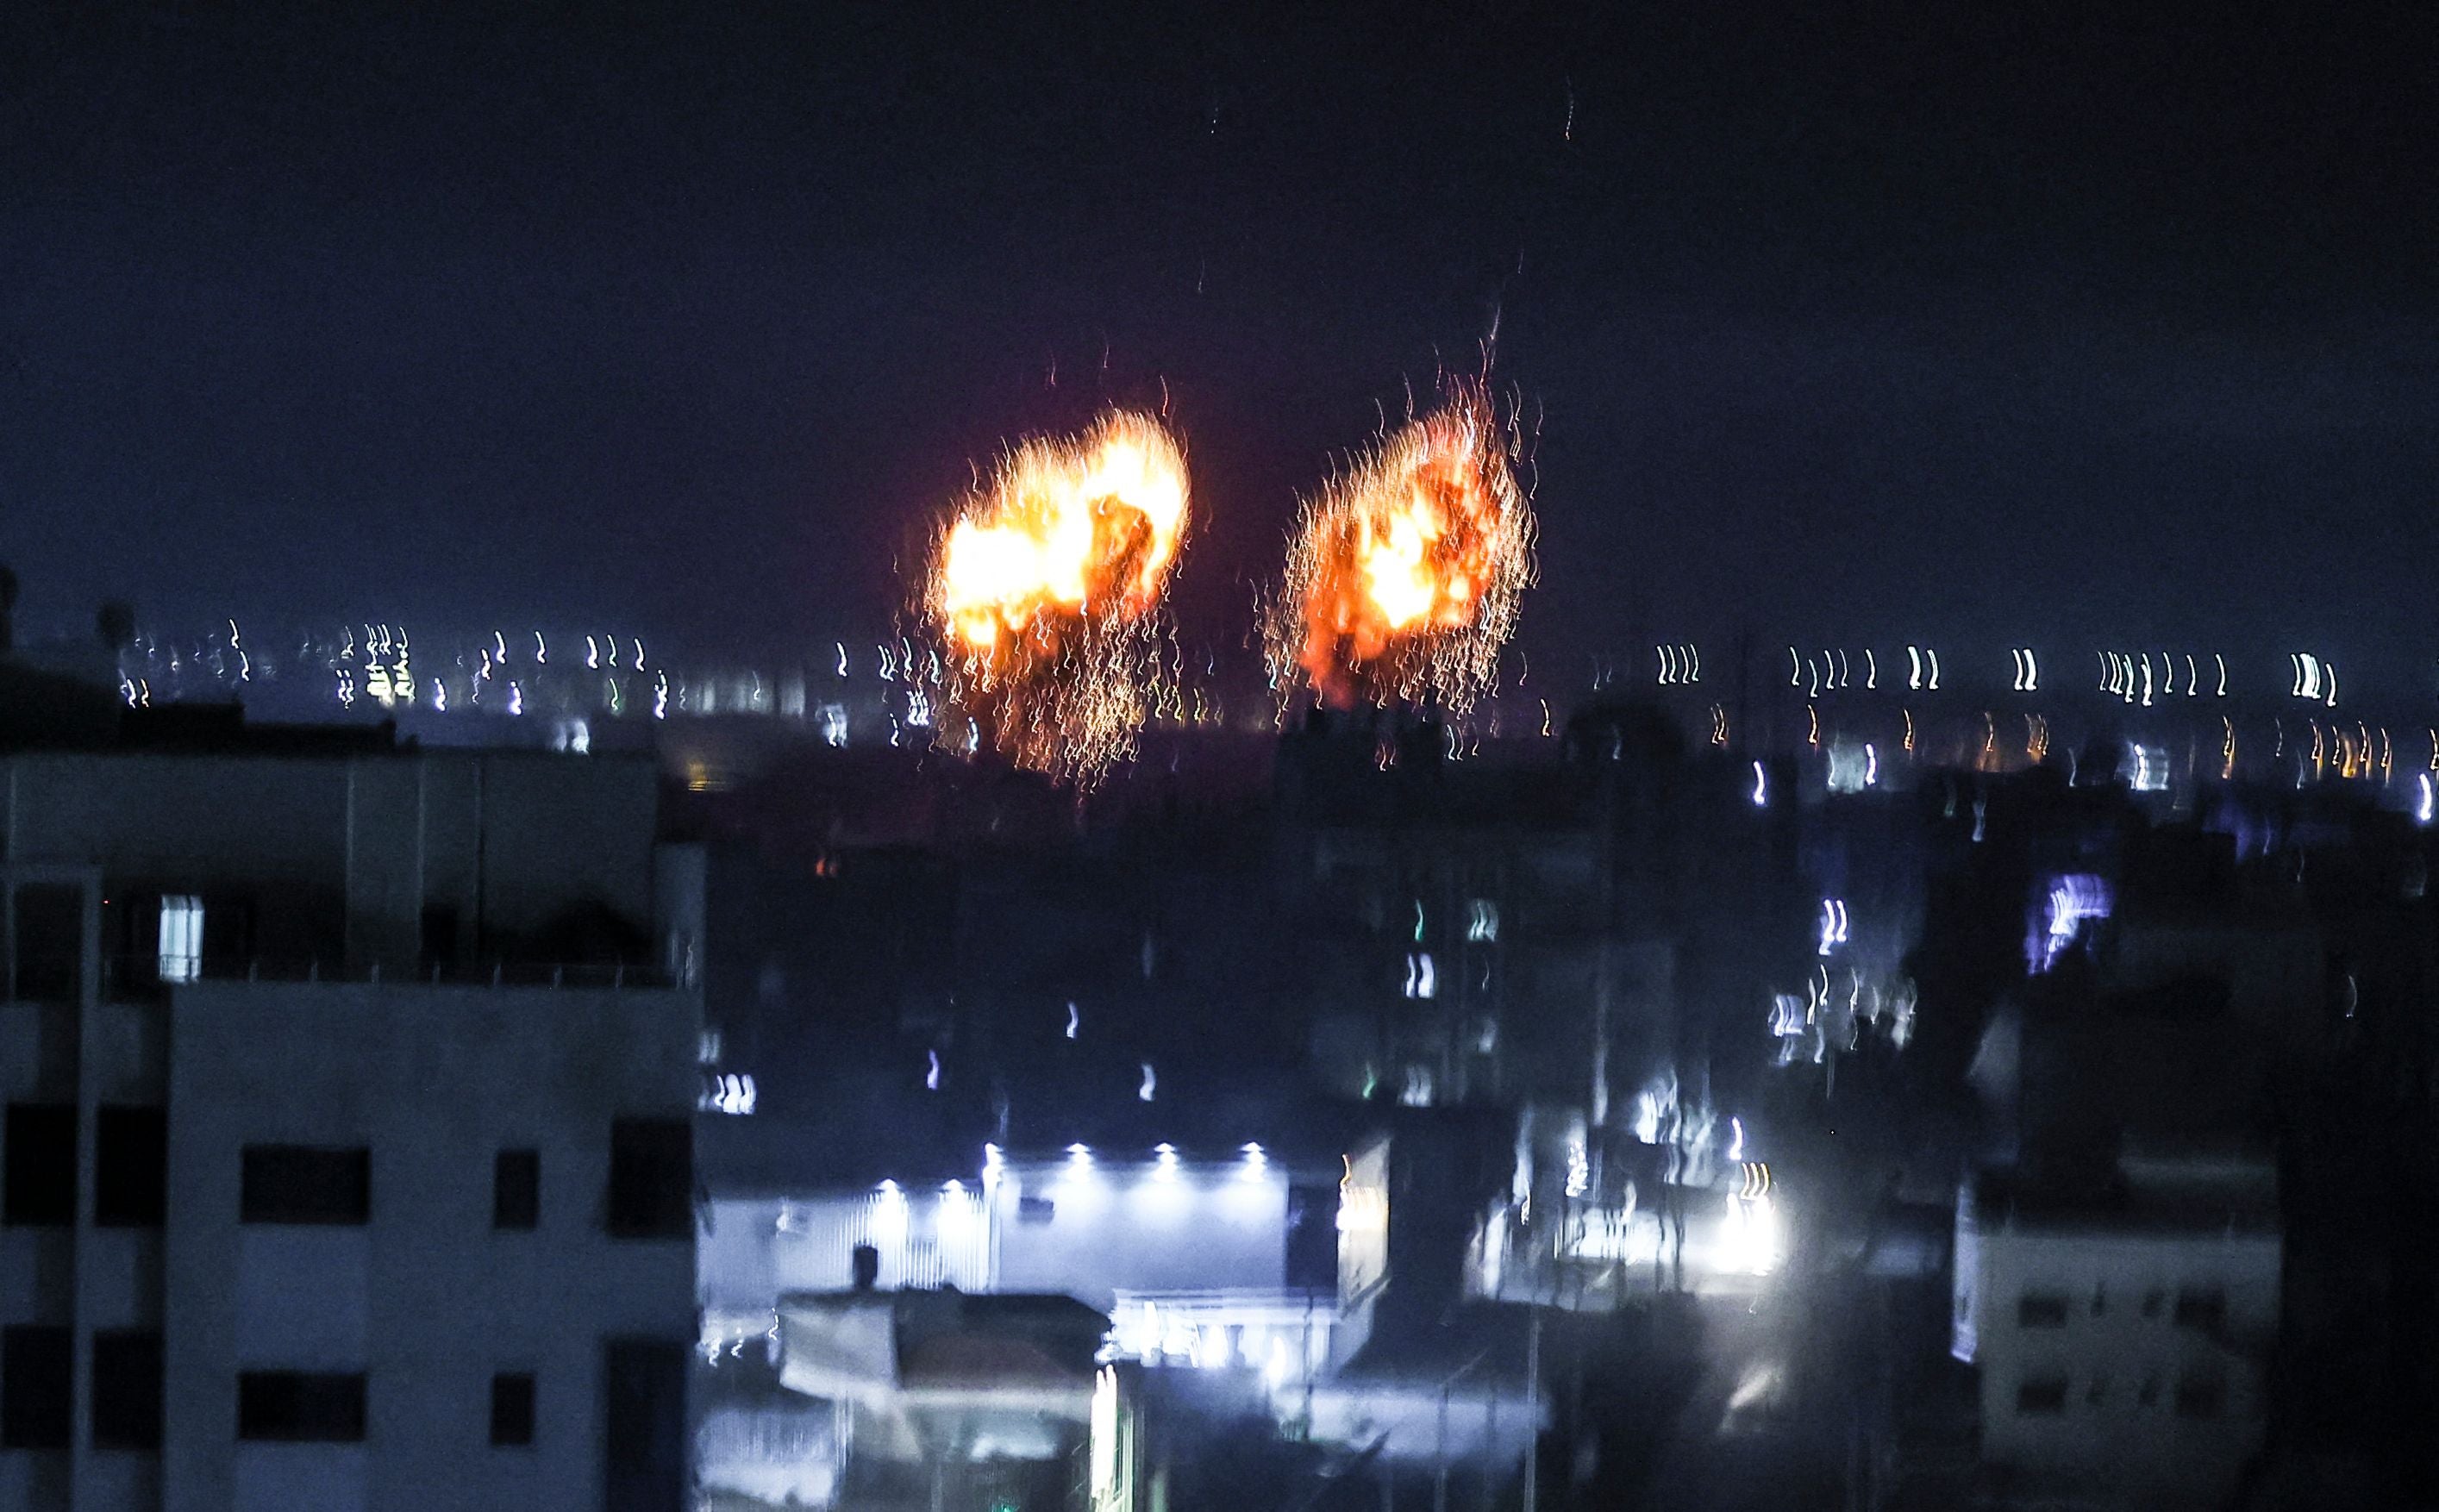 Explosions lit up the night sky about building in Gaza city as Israeli forces shelled the Palestinian enclave, in response to incendiary balloons.